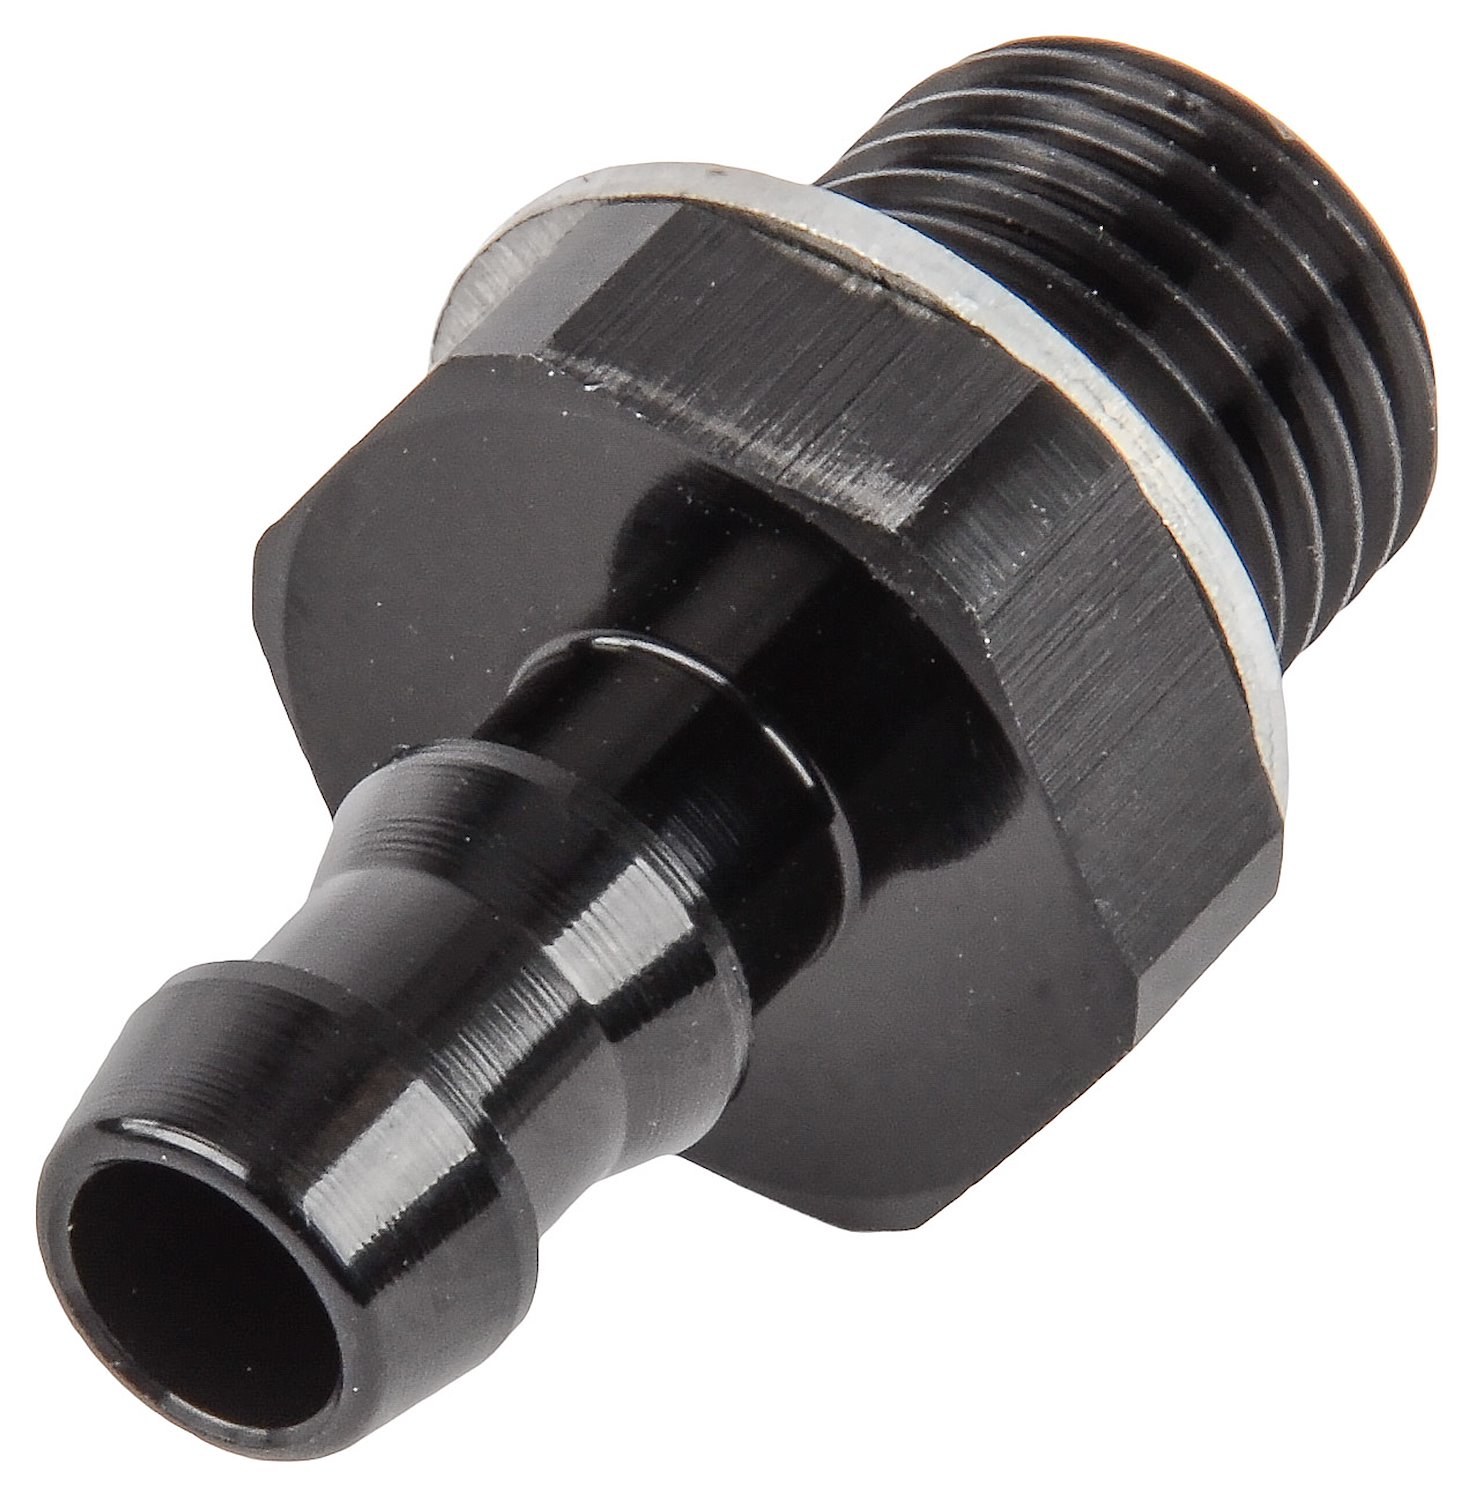 Hose Barb Adapter 14mm x 1.5 Male Straight to 1/2" Hose